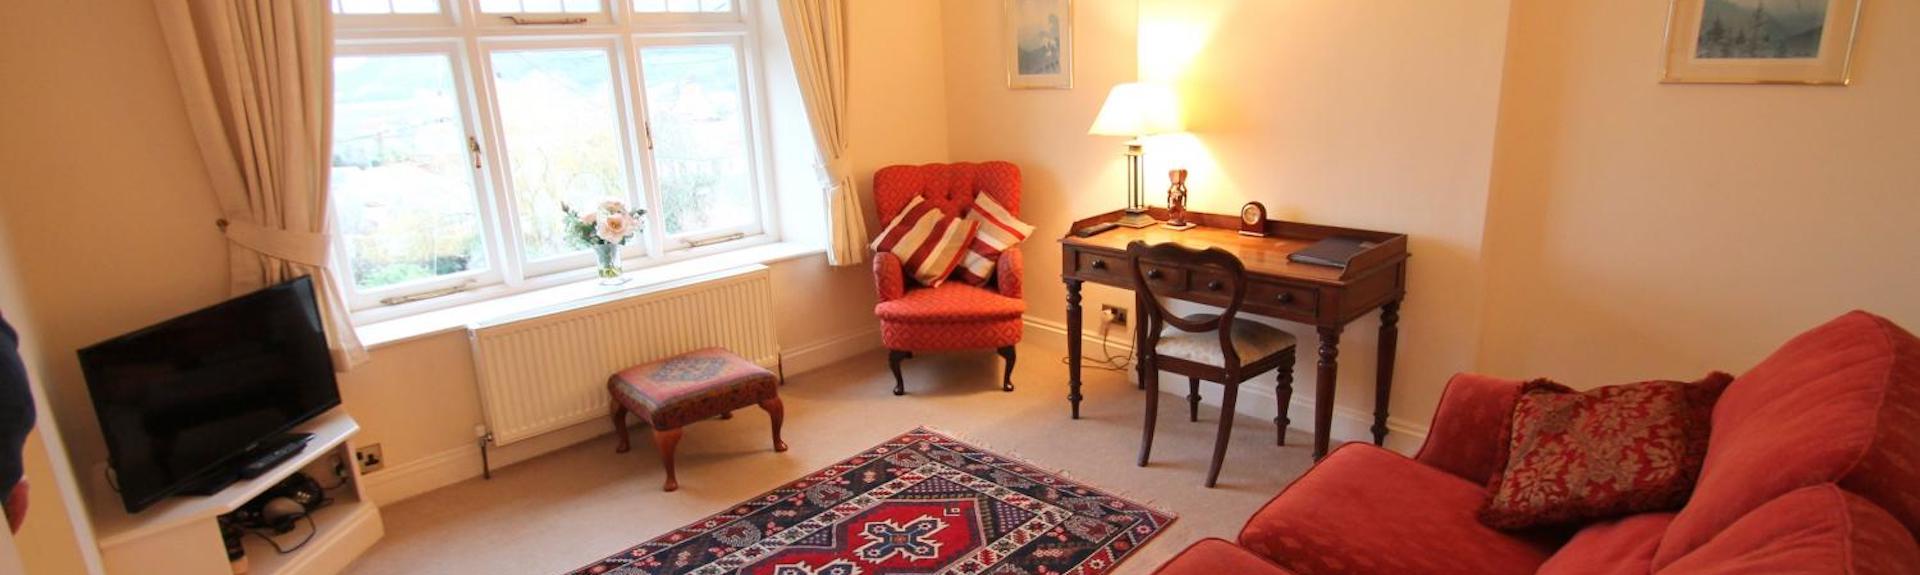 A Somerset holiday apartment lounge with comfortable sofa, TV and side tables.